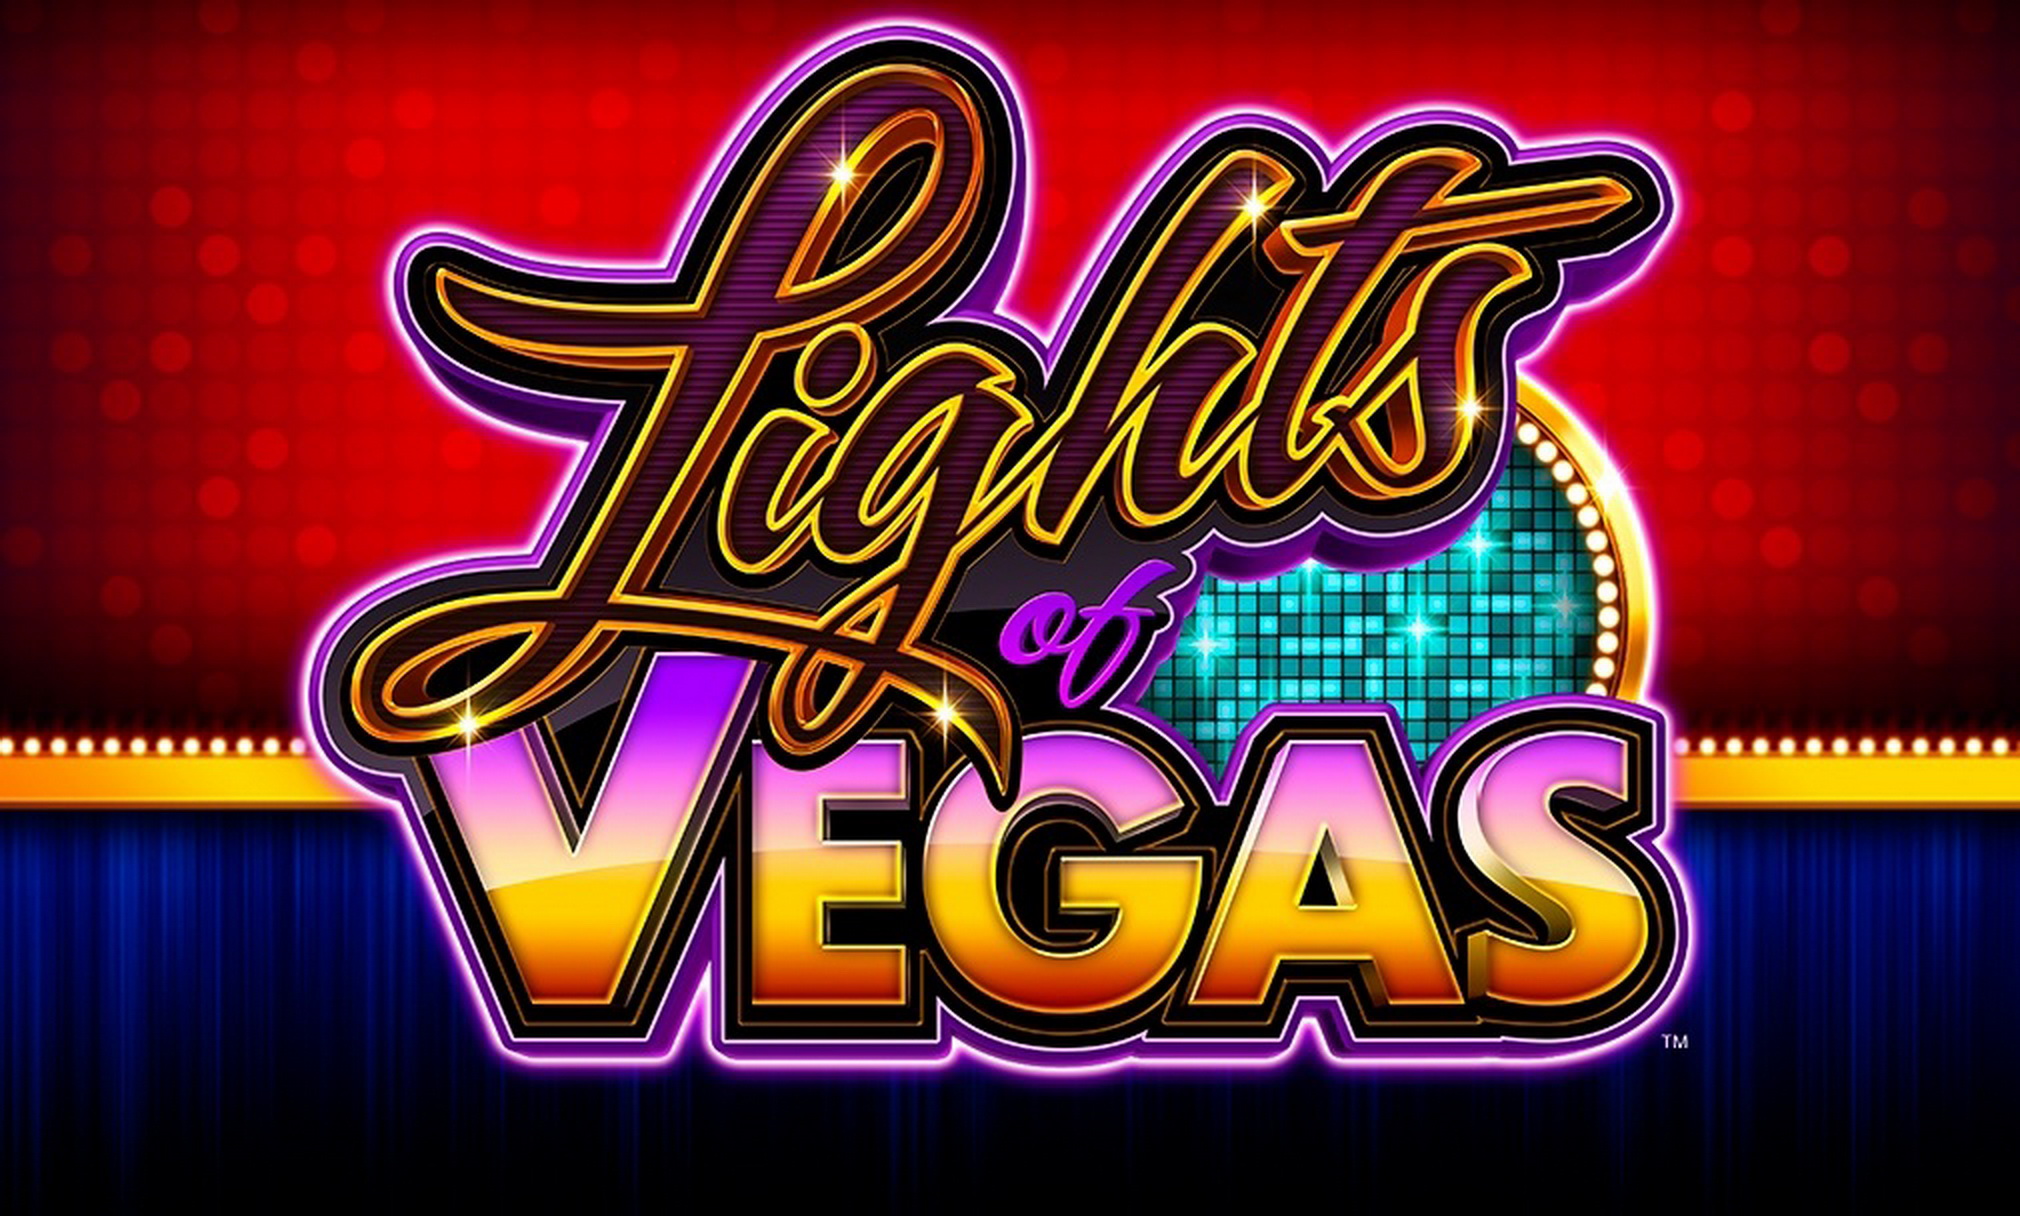 The Lights of Vegas Online Slot Demo Game by bluberi